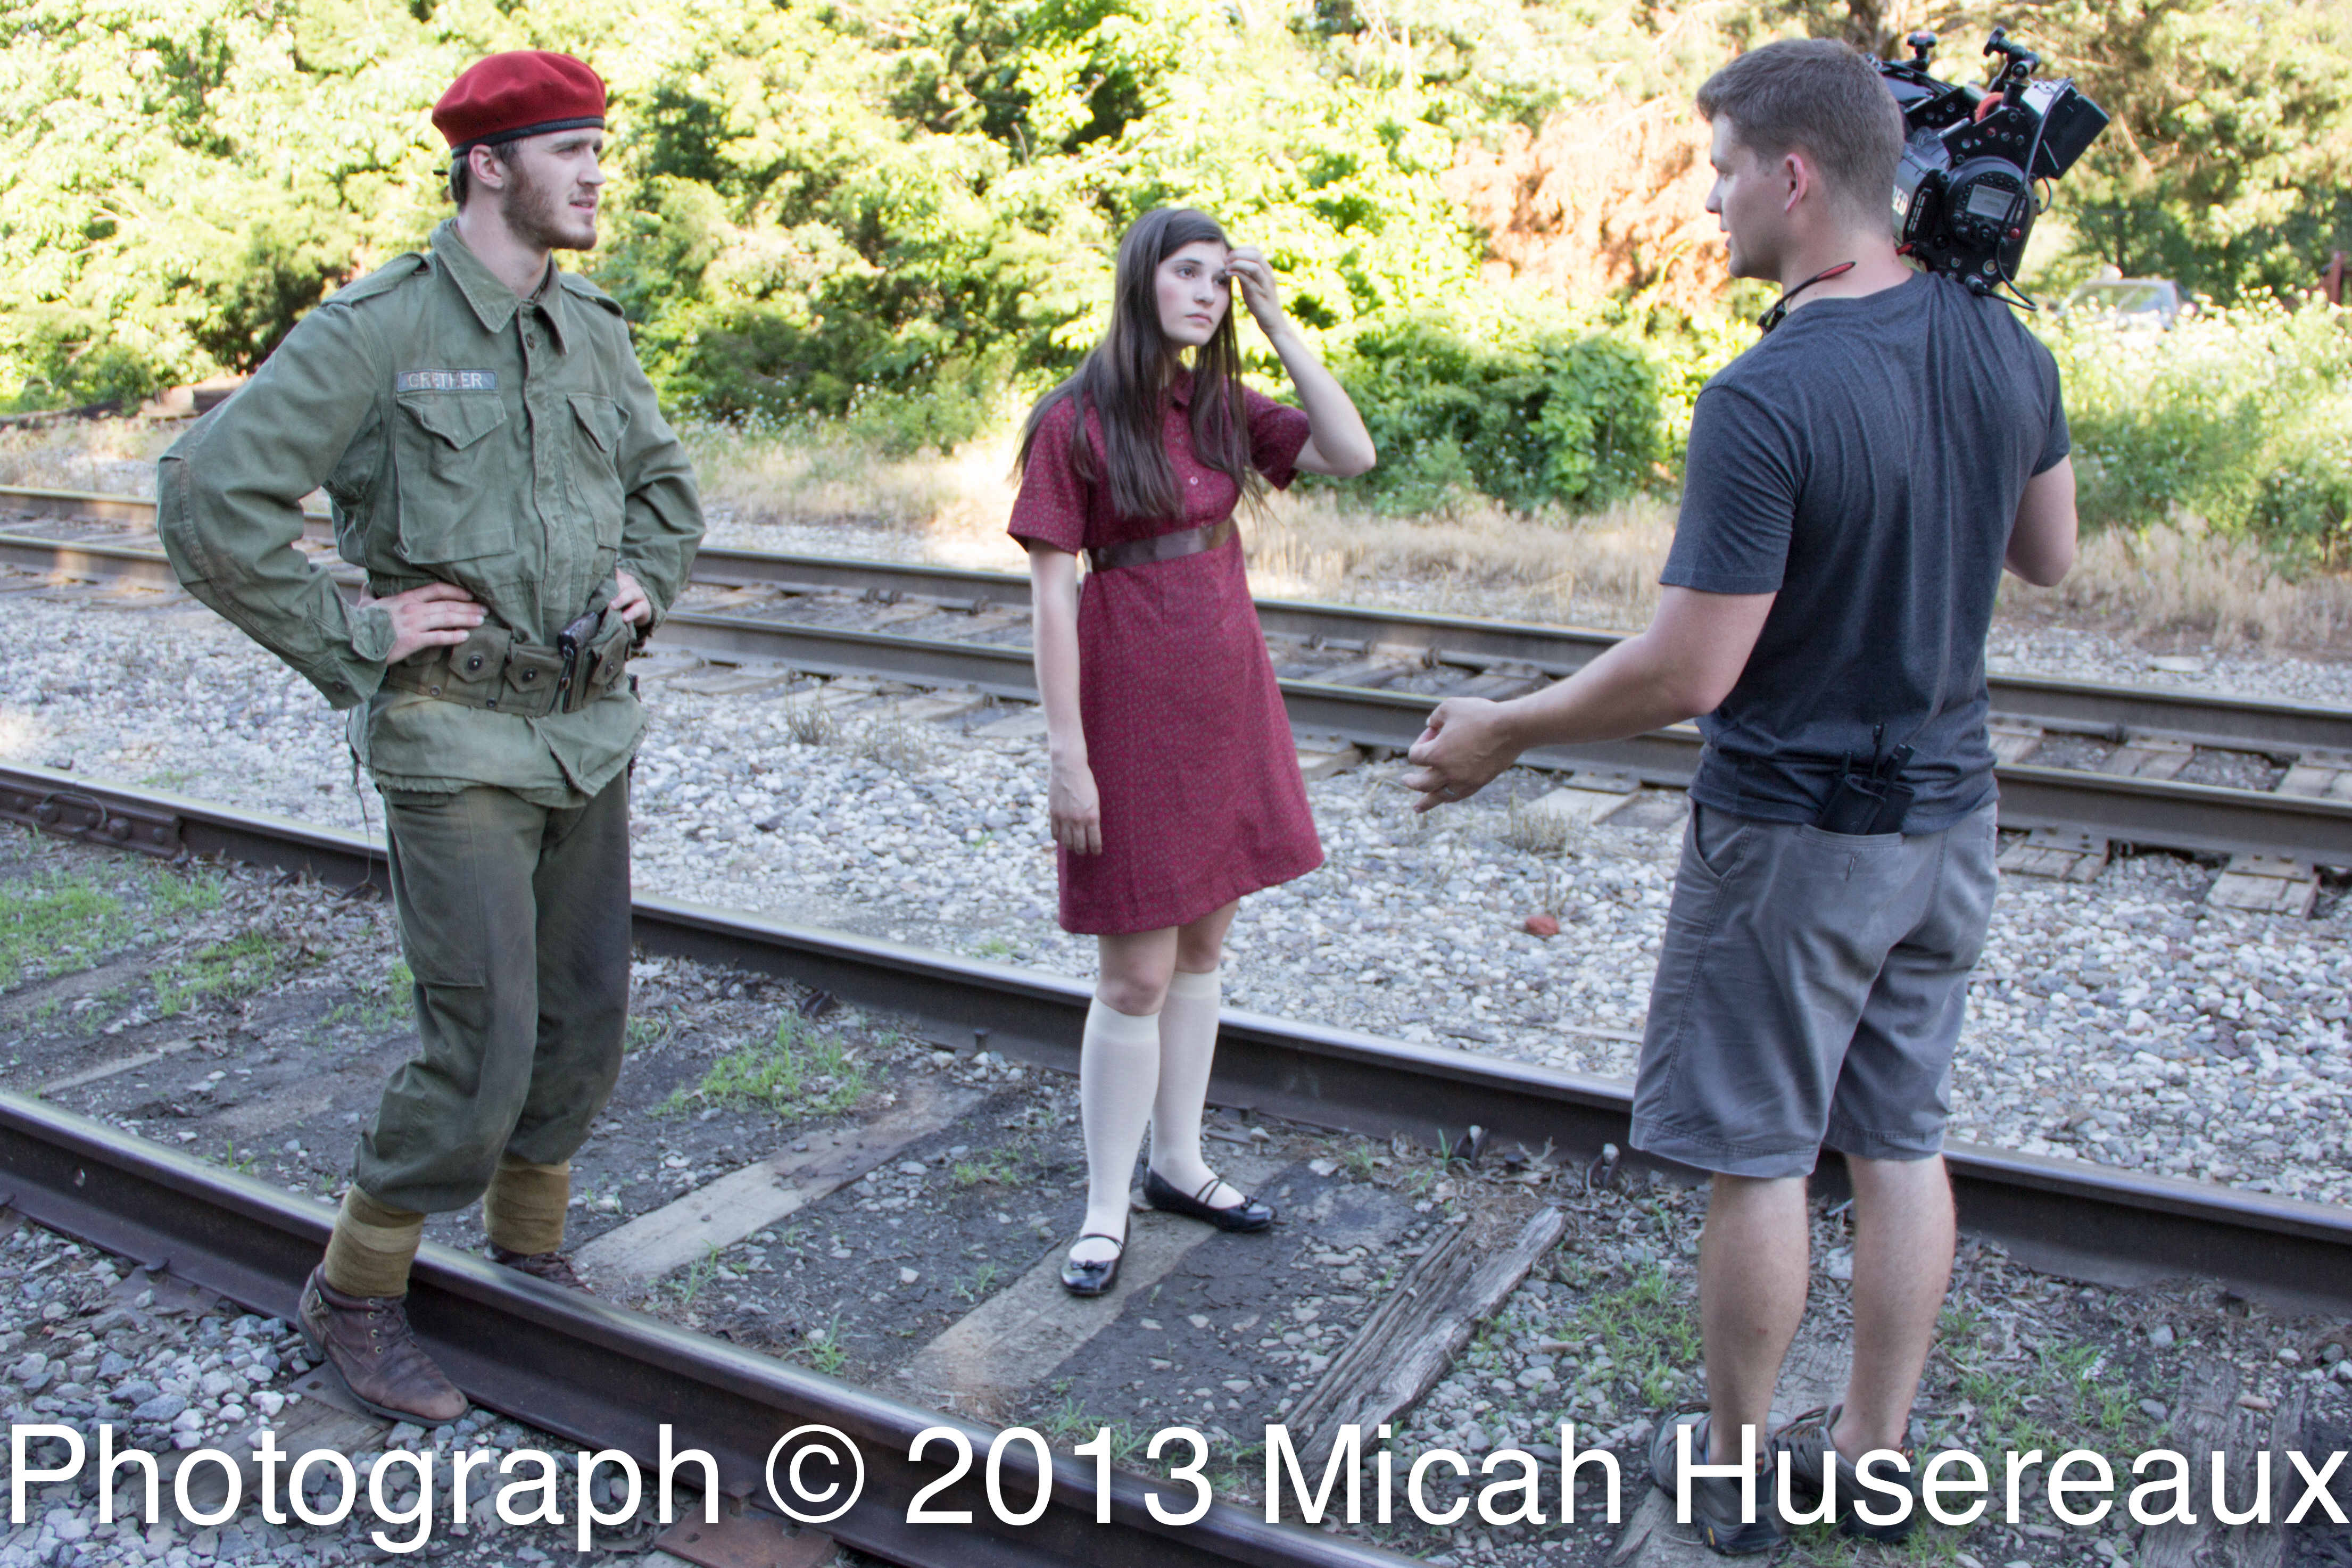 Andrea Fantauzzi and Seth Andrew Macchi with director Bradley J. Lincoln filming the dreaming sequence of Adira.